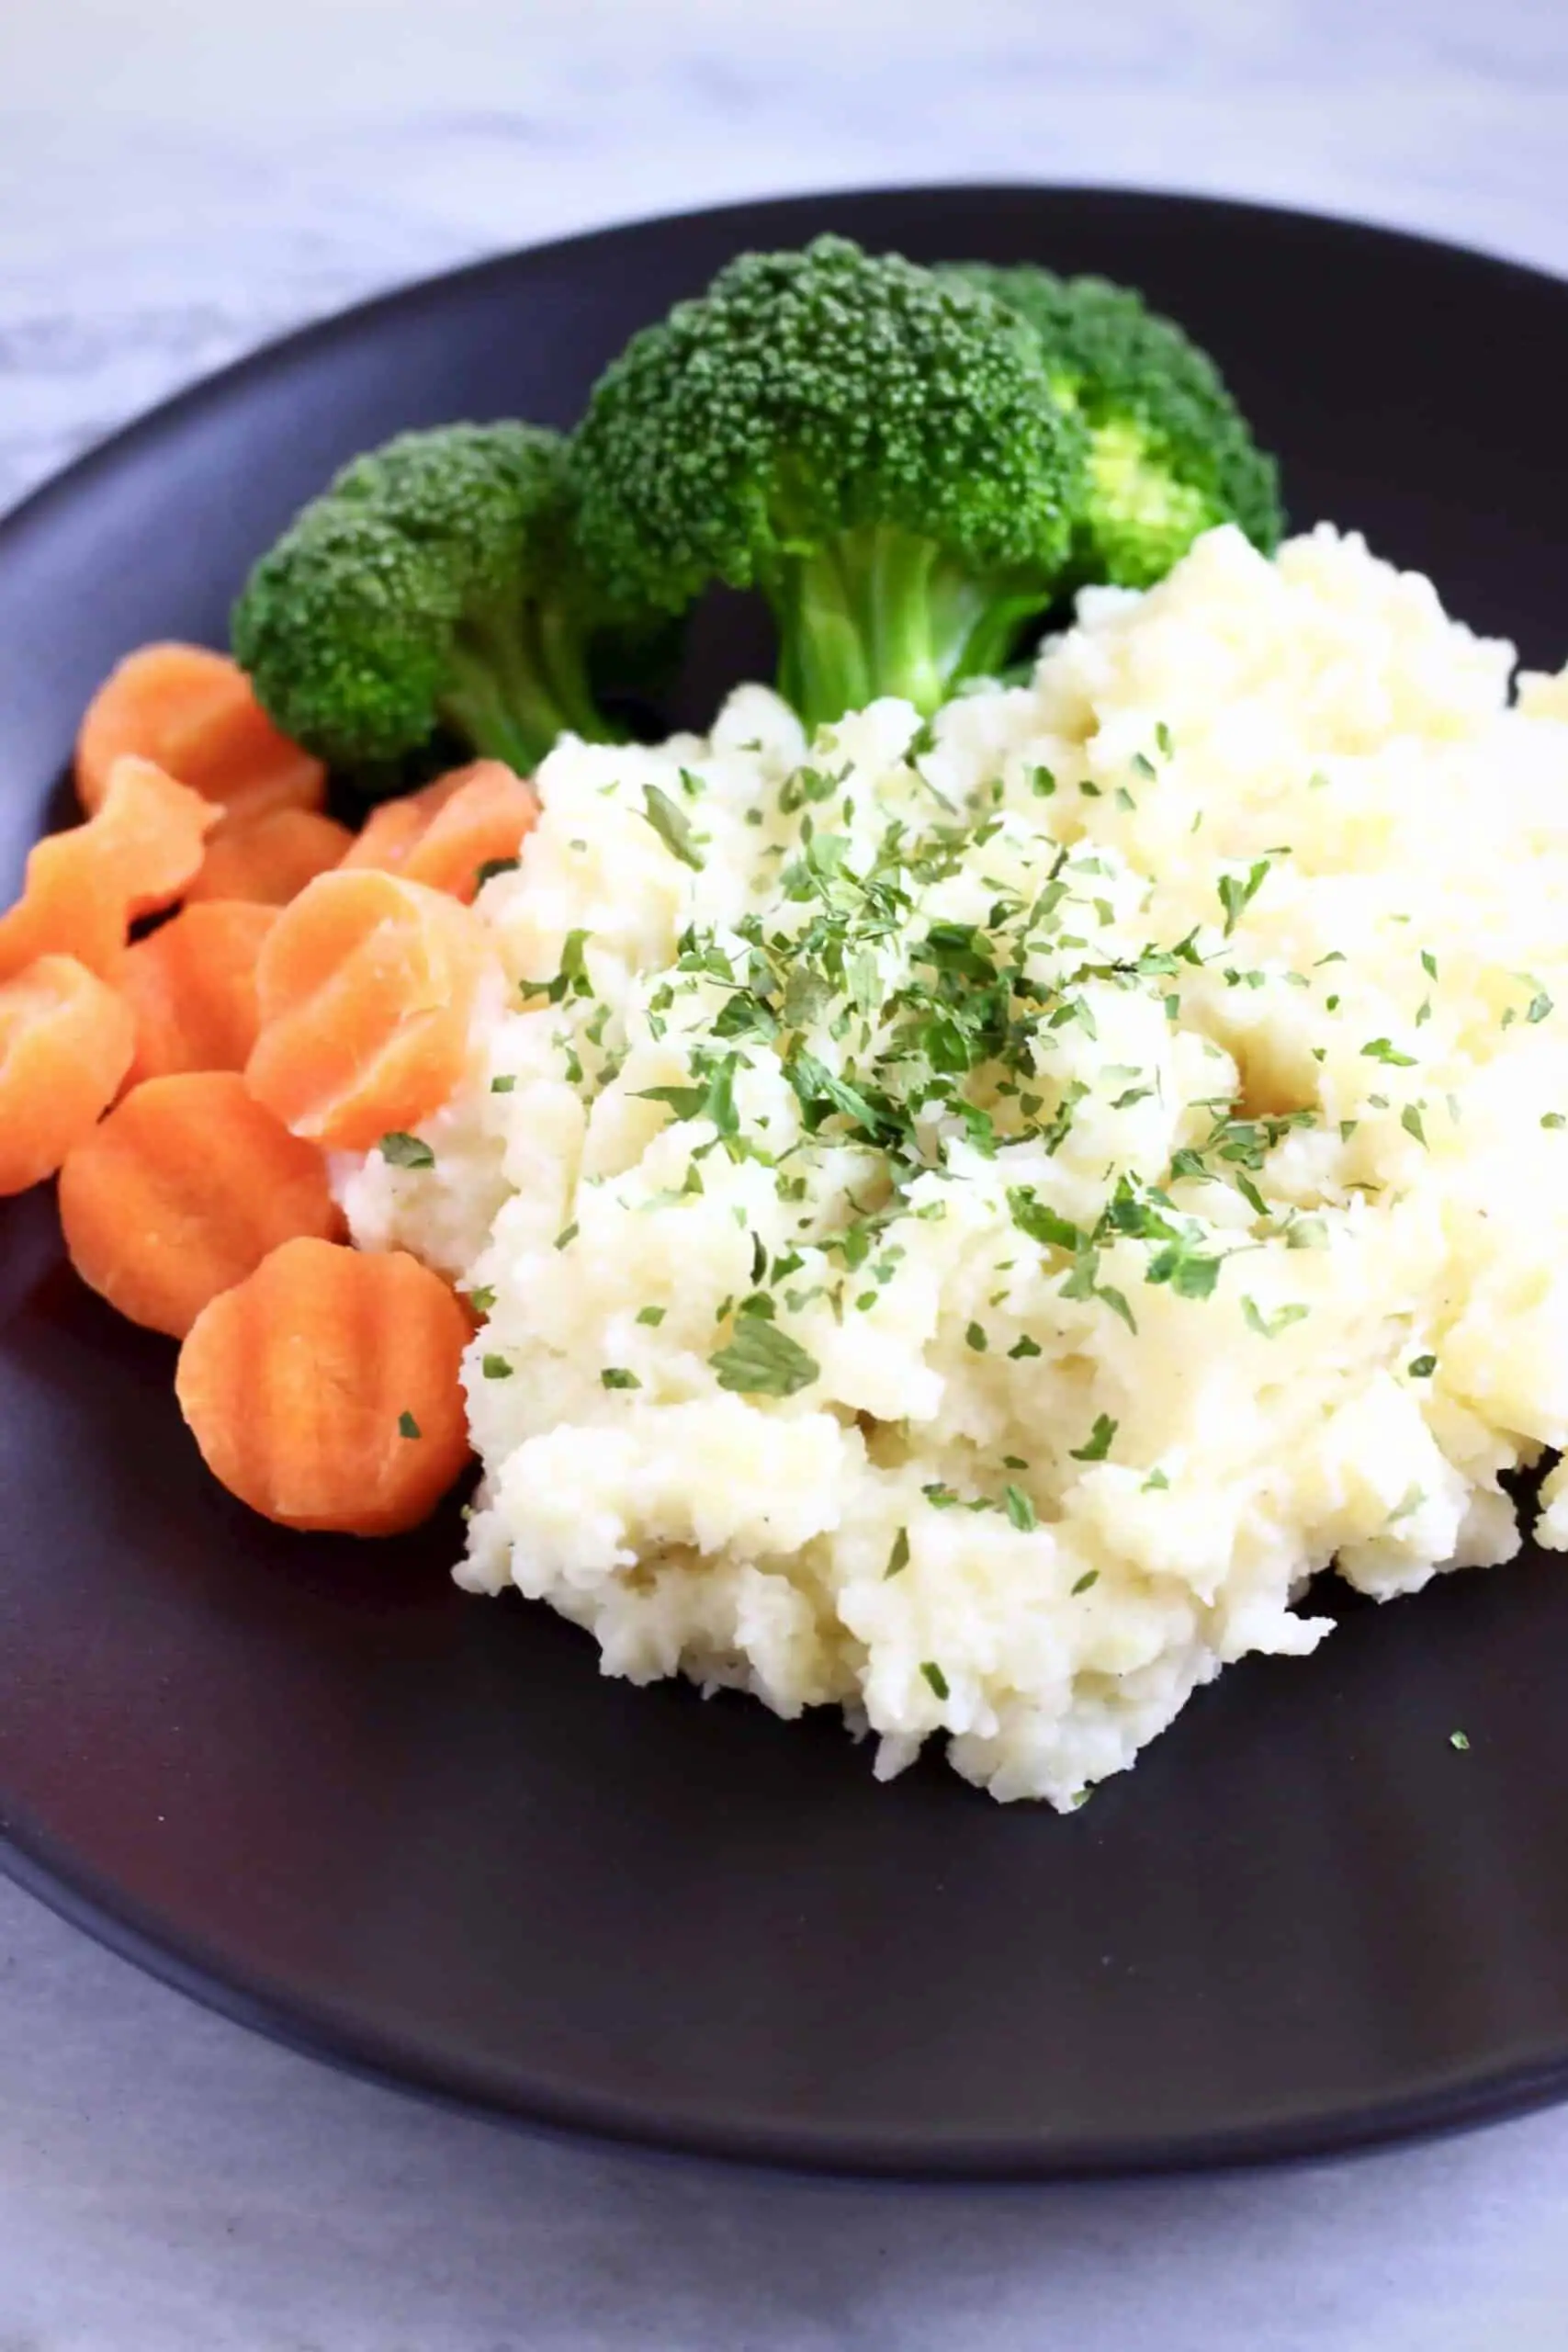 A pile of creamy vegan mashed potatoes sprinkled with green herbs with sliced carrots and broccoli on a plate